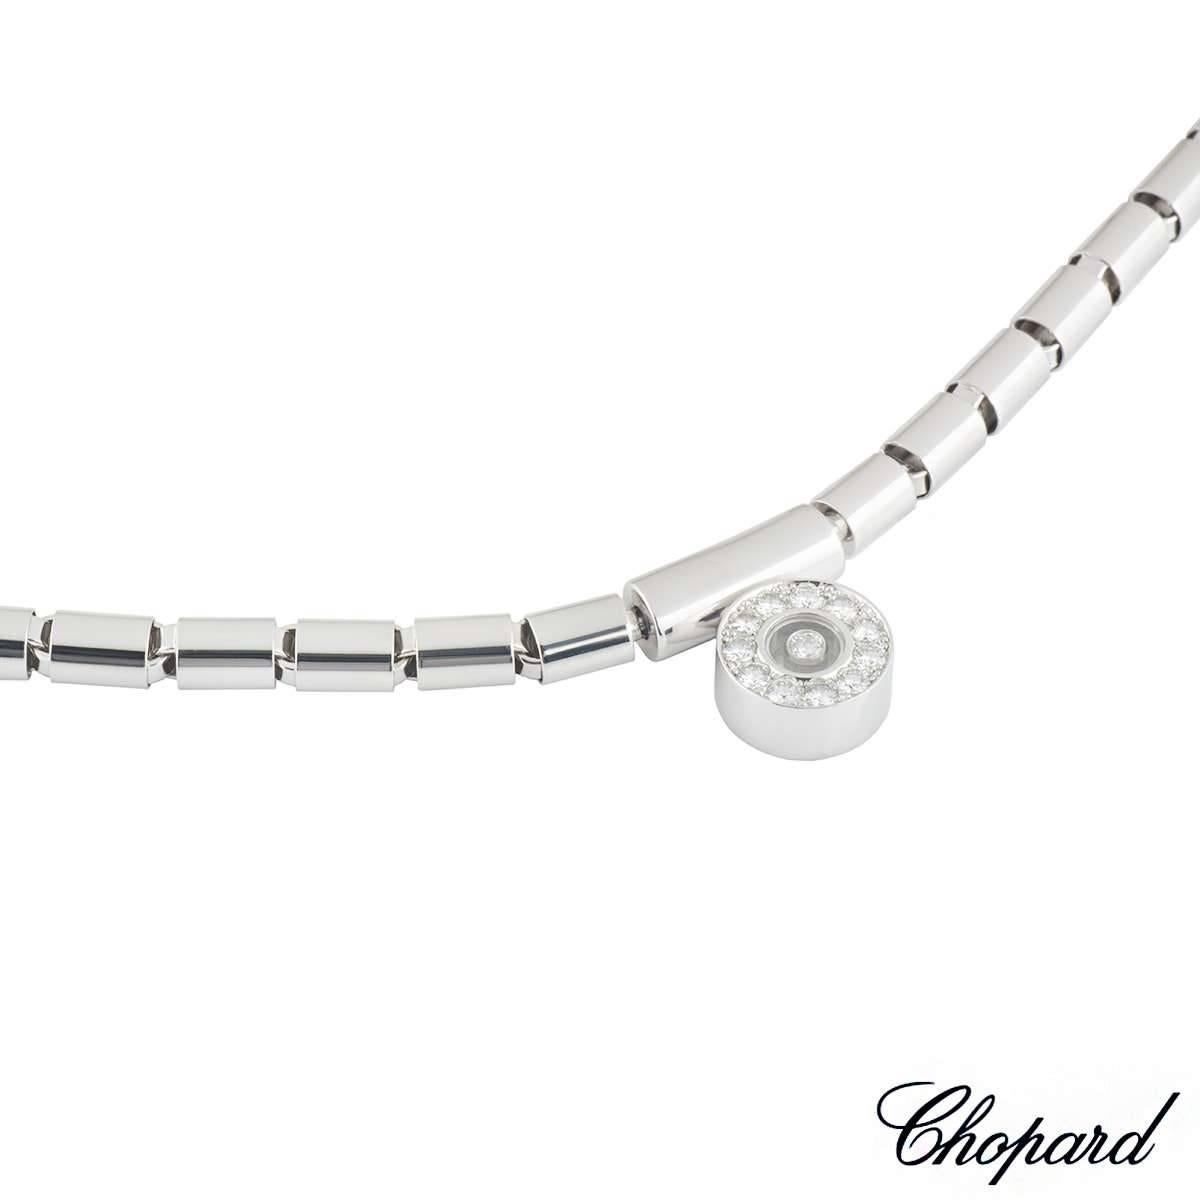 An 18k white gold necklace from the Happy Diamonds collection by Chopard. The necklace features a circular 1.3cm motif to the centre, set with 11 round brilliant cut diamonds around the outer edge. In the centre of the motif is a single floating